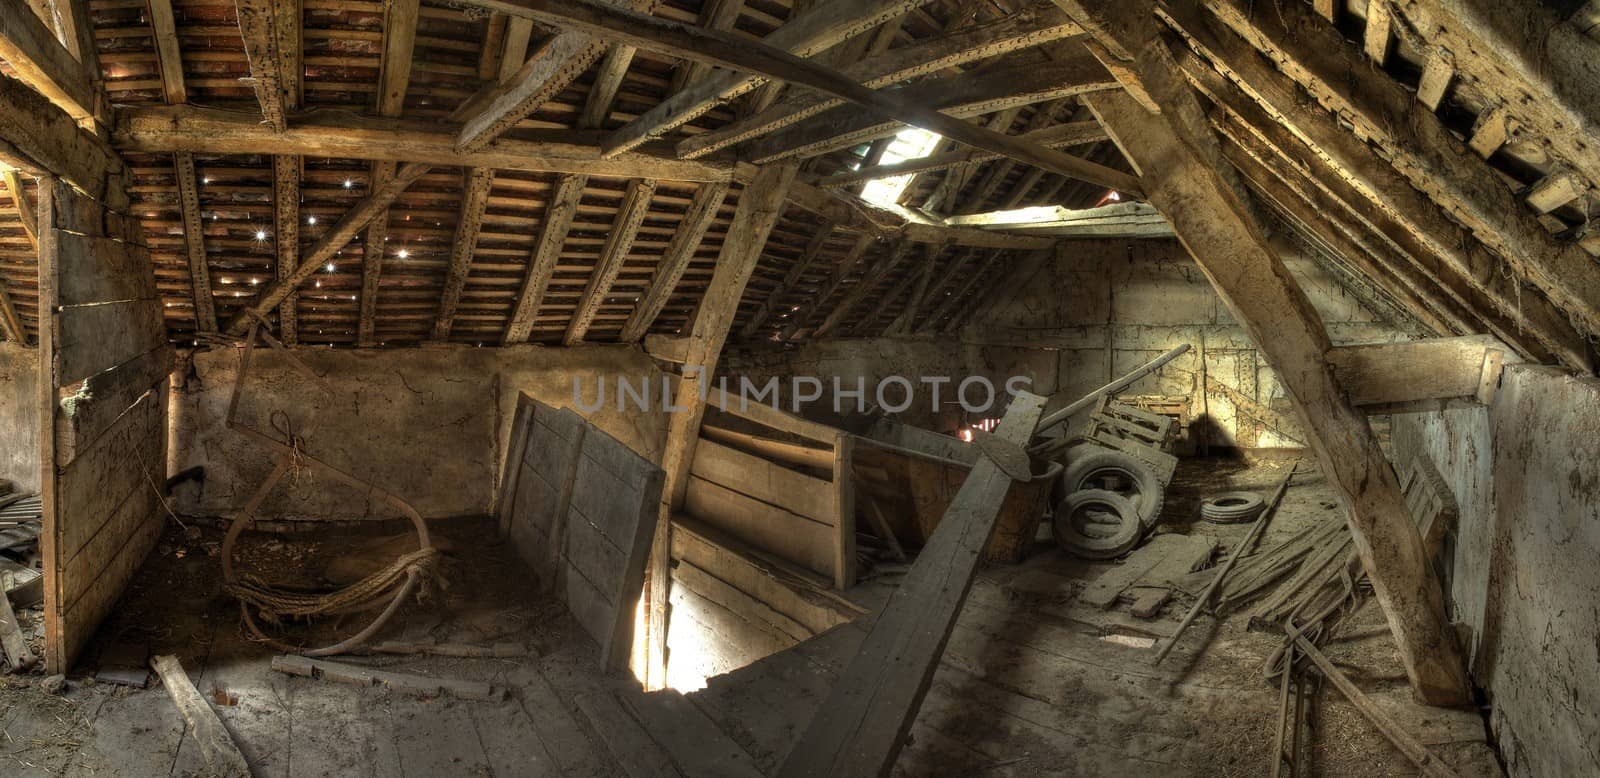 Timber-frame and wattle and daub constructed English granary interior.